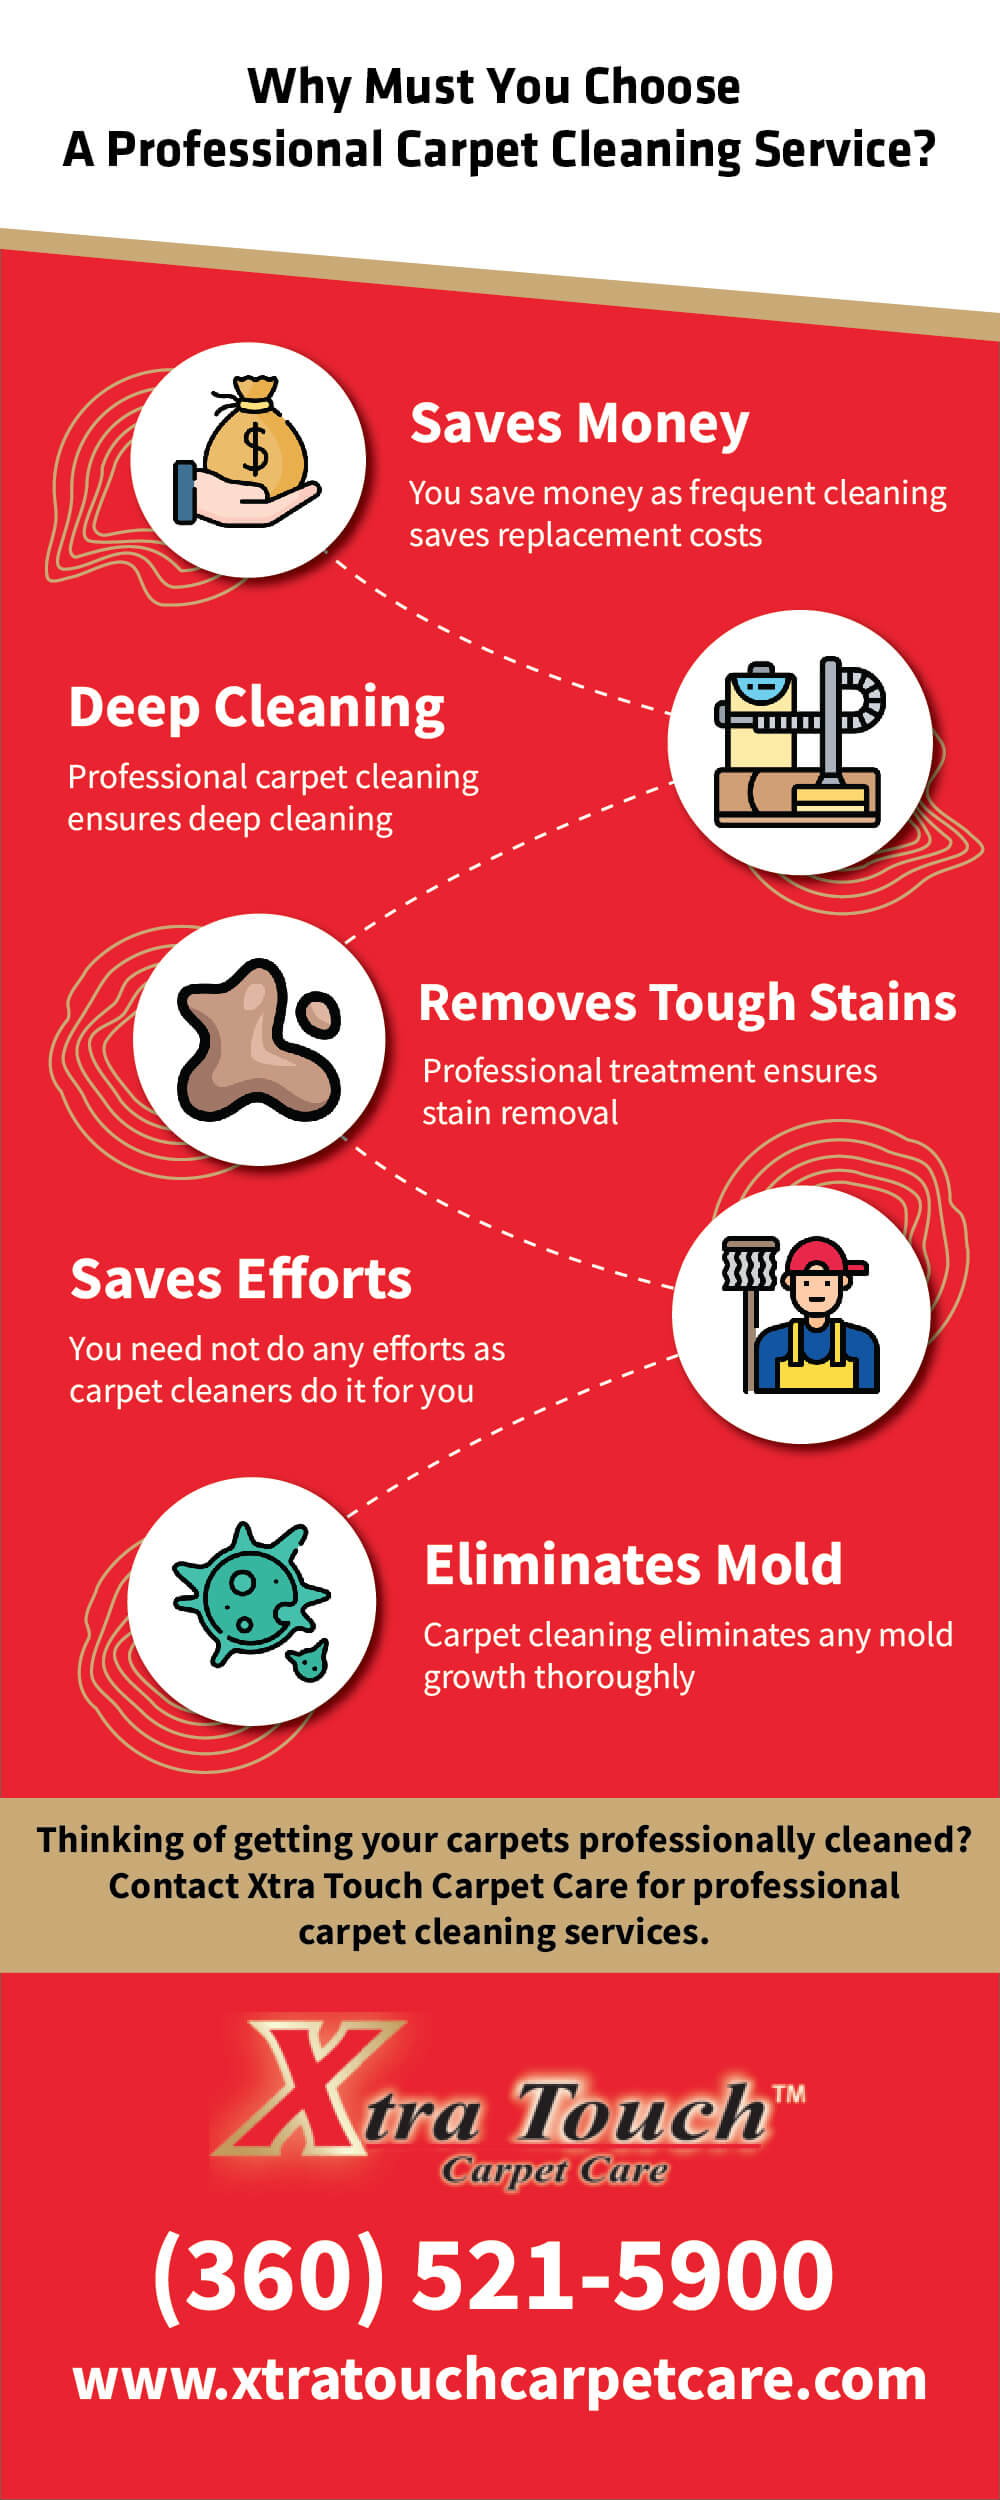 Why Must You Choose A Professional Carpet Cleaning Service